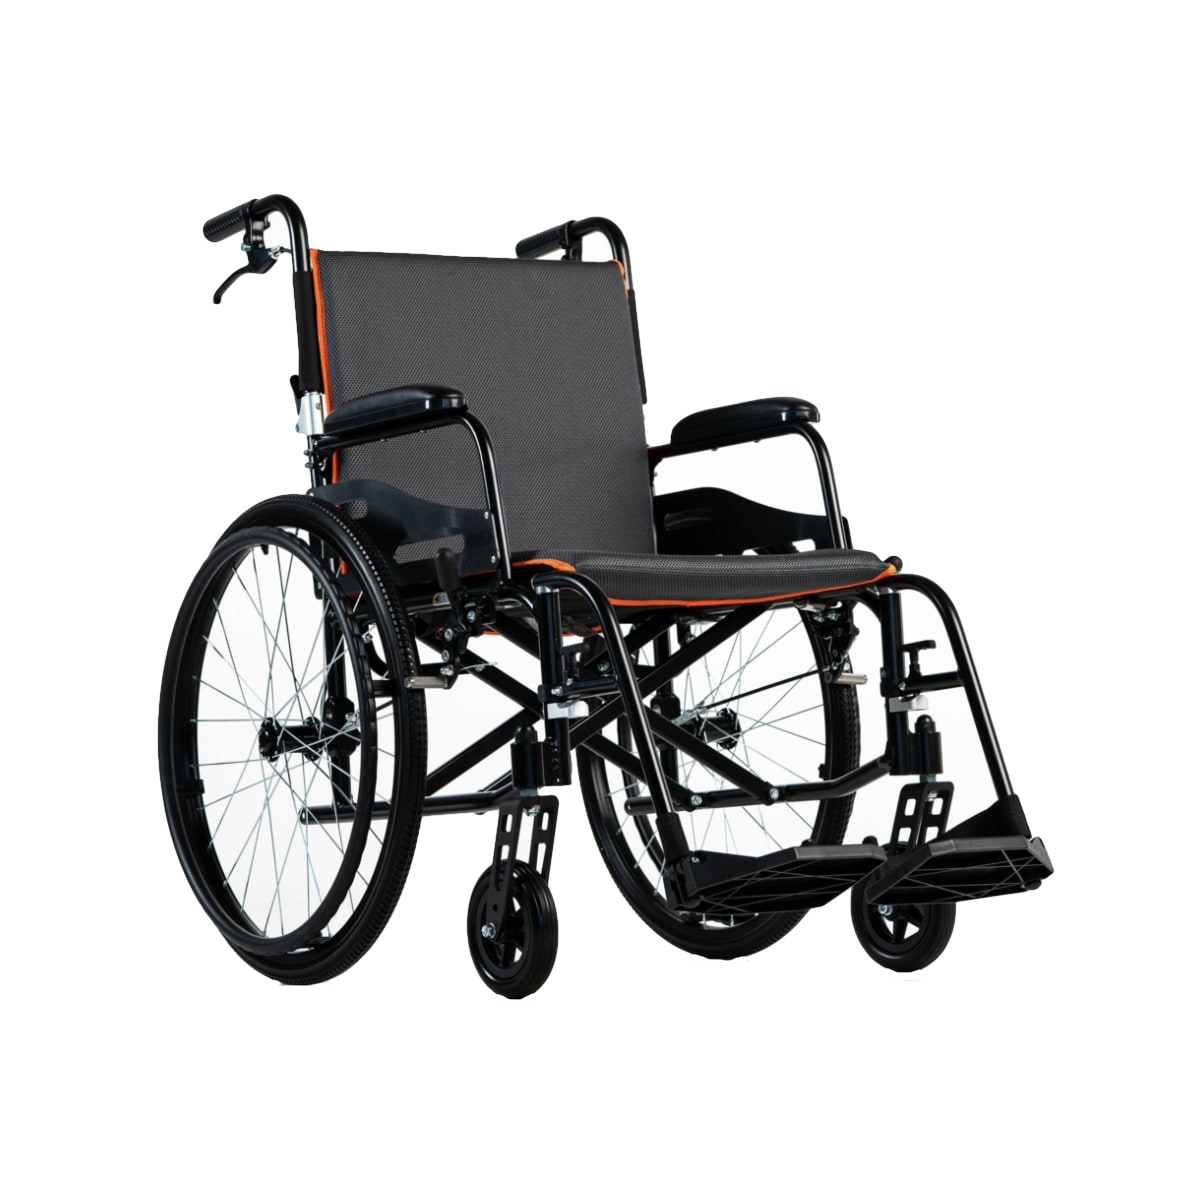 Feather Manual Wheelchair with sleek fabric design and black frame